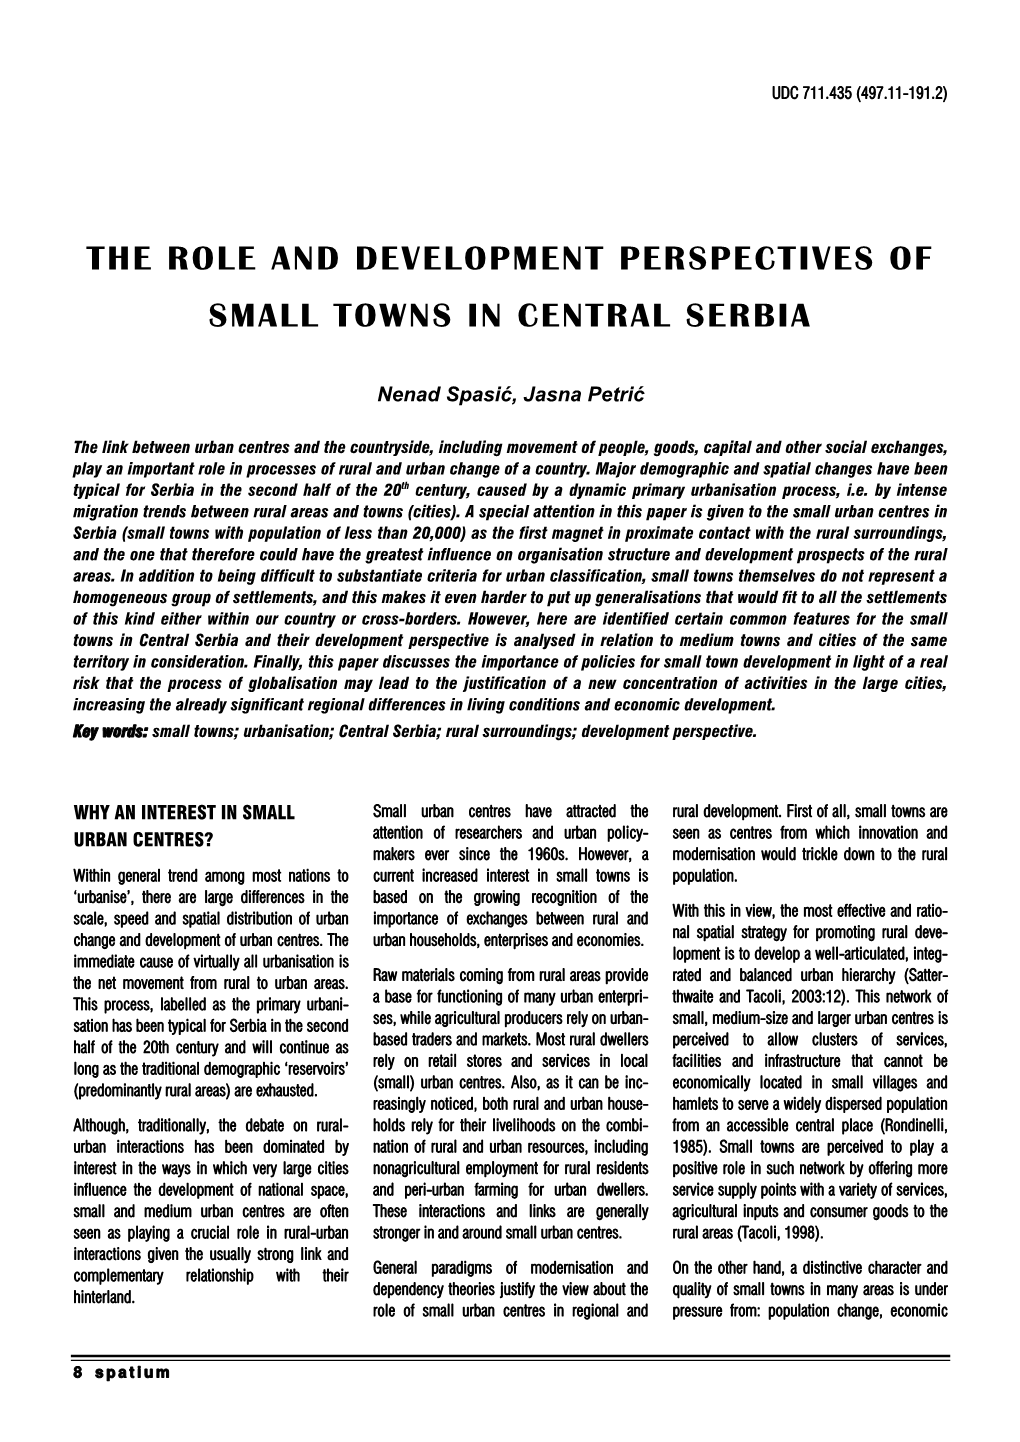 The Role and Development Perspectives of Small Towns in Central Serbia